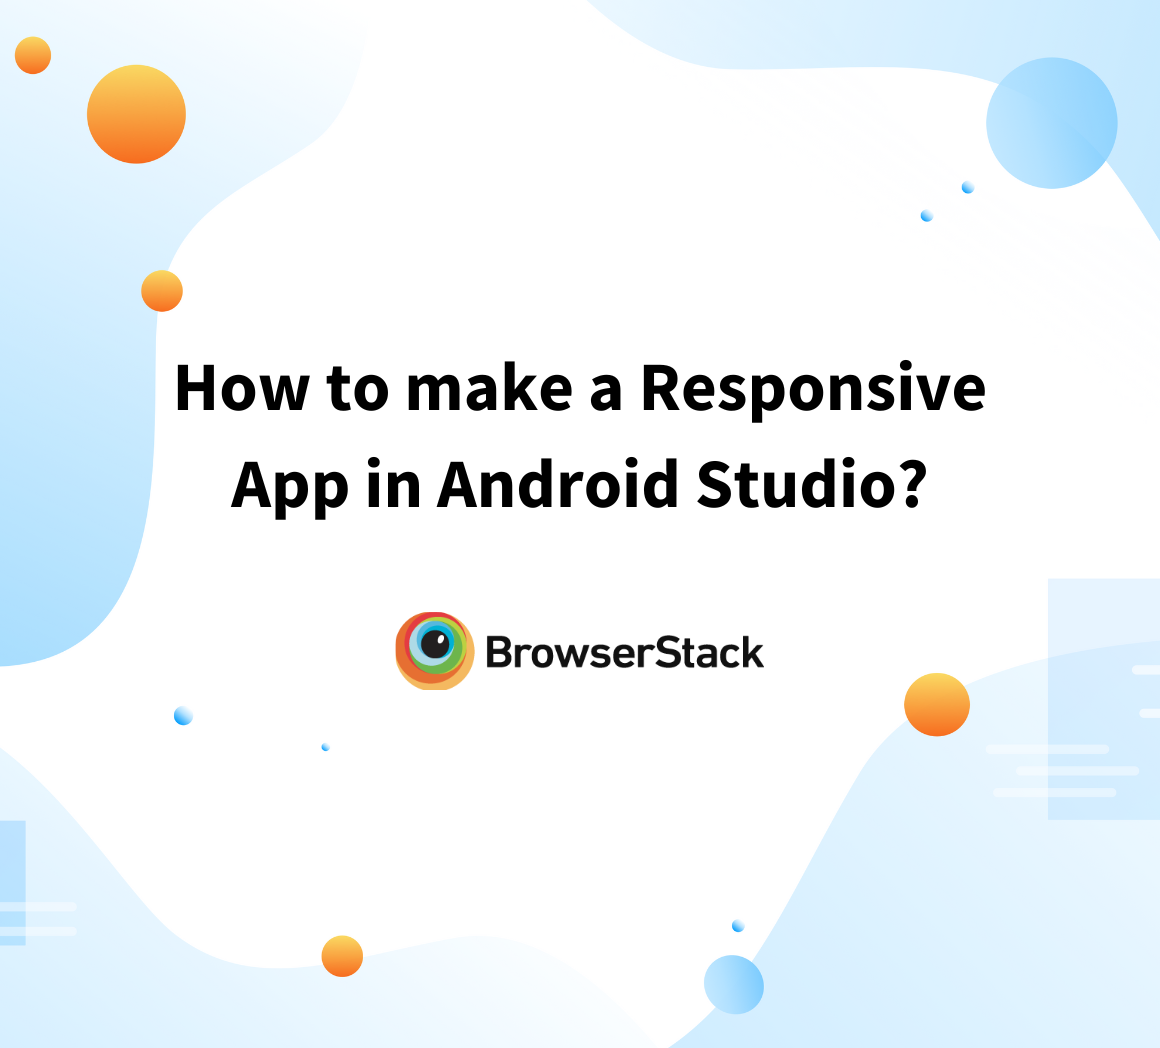 How to make a Responsive App in Android Studio